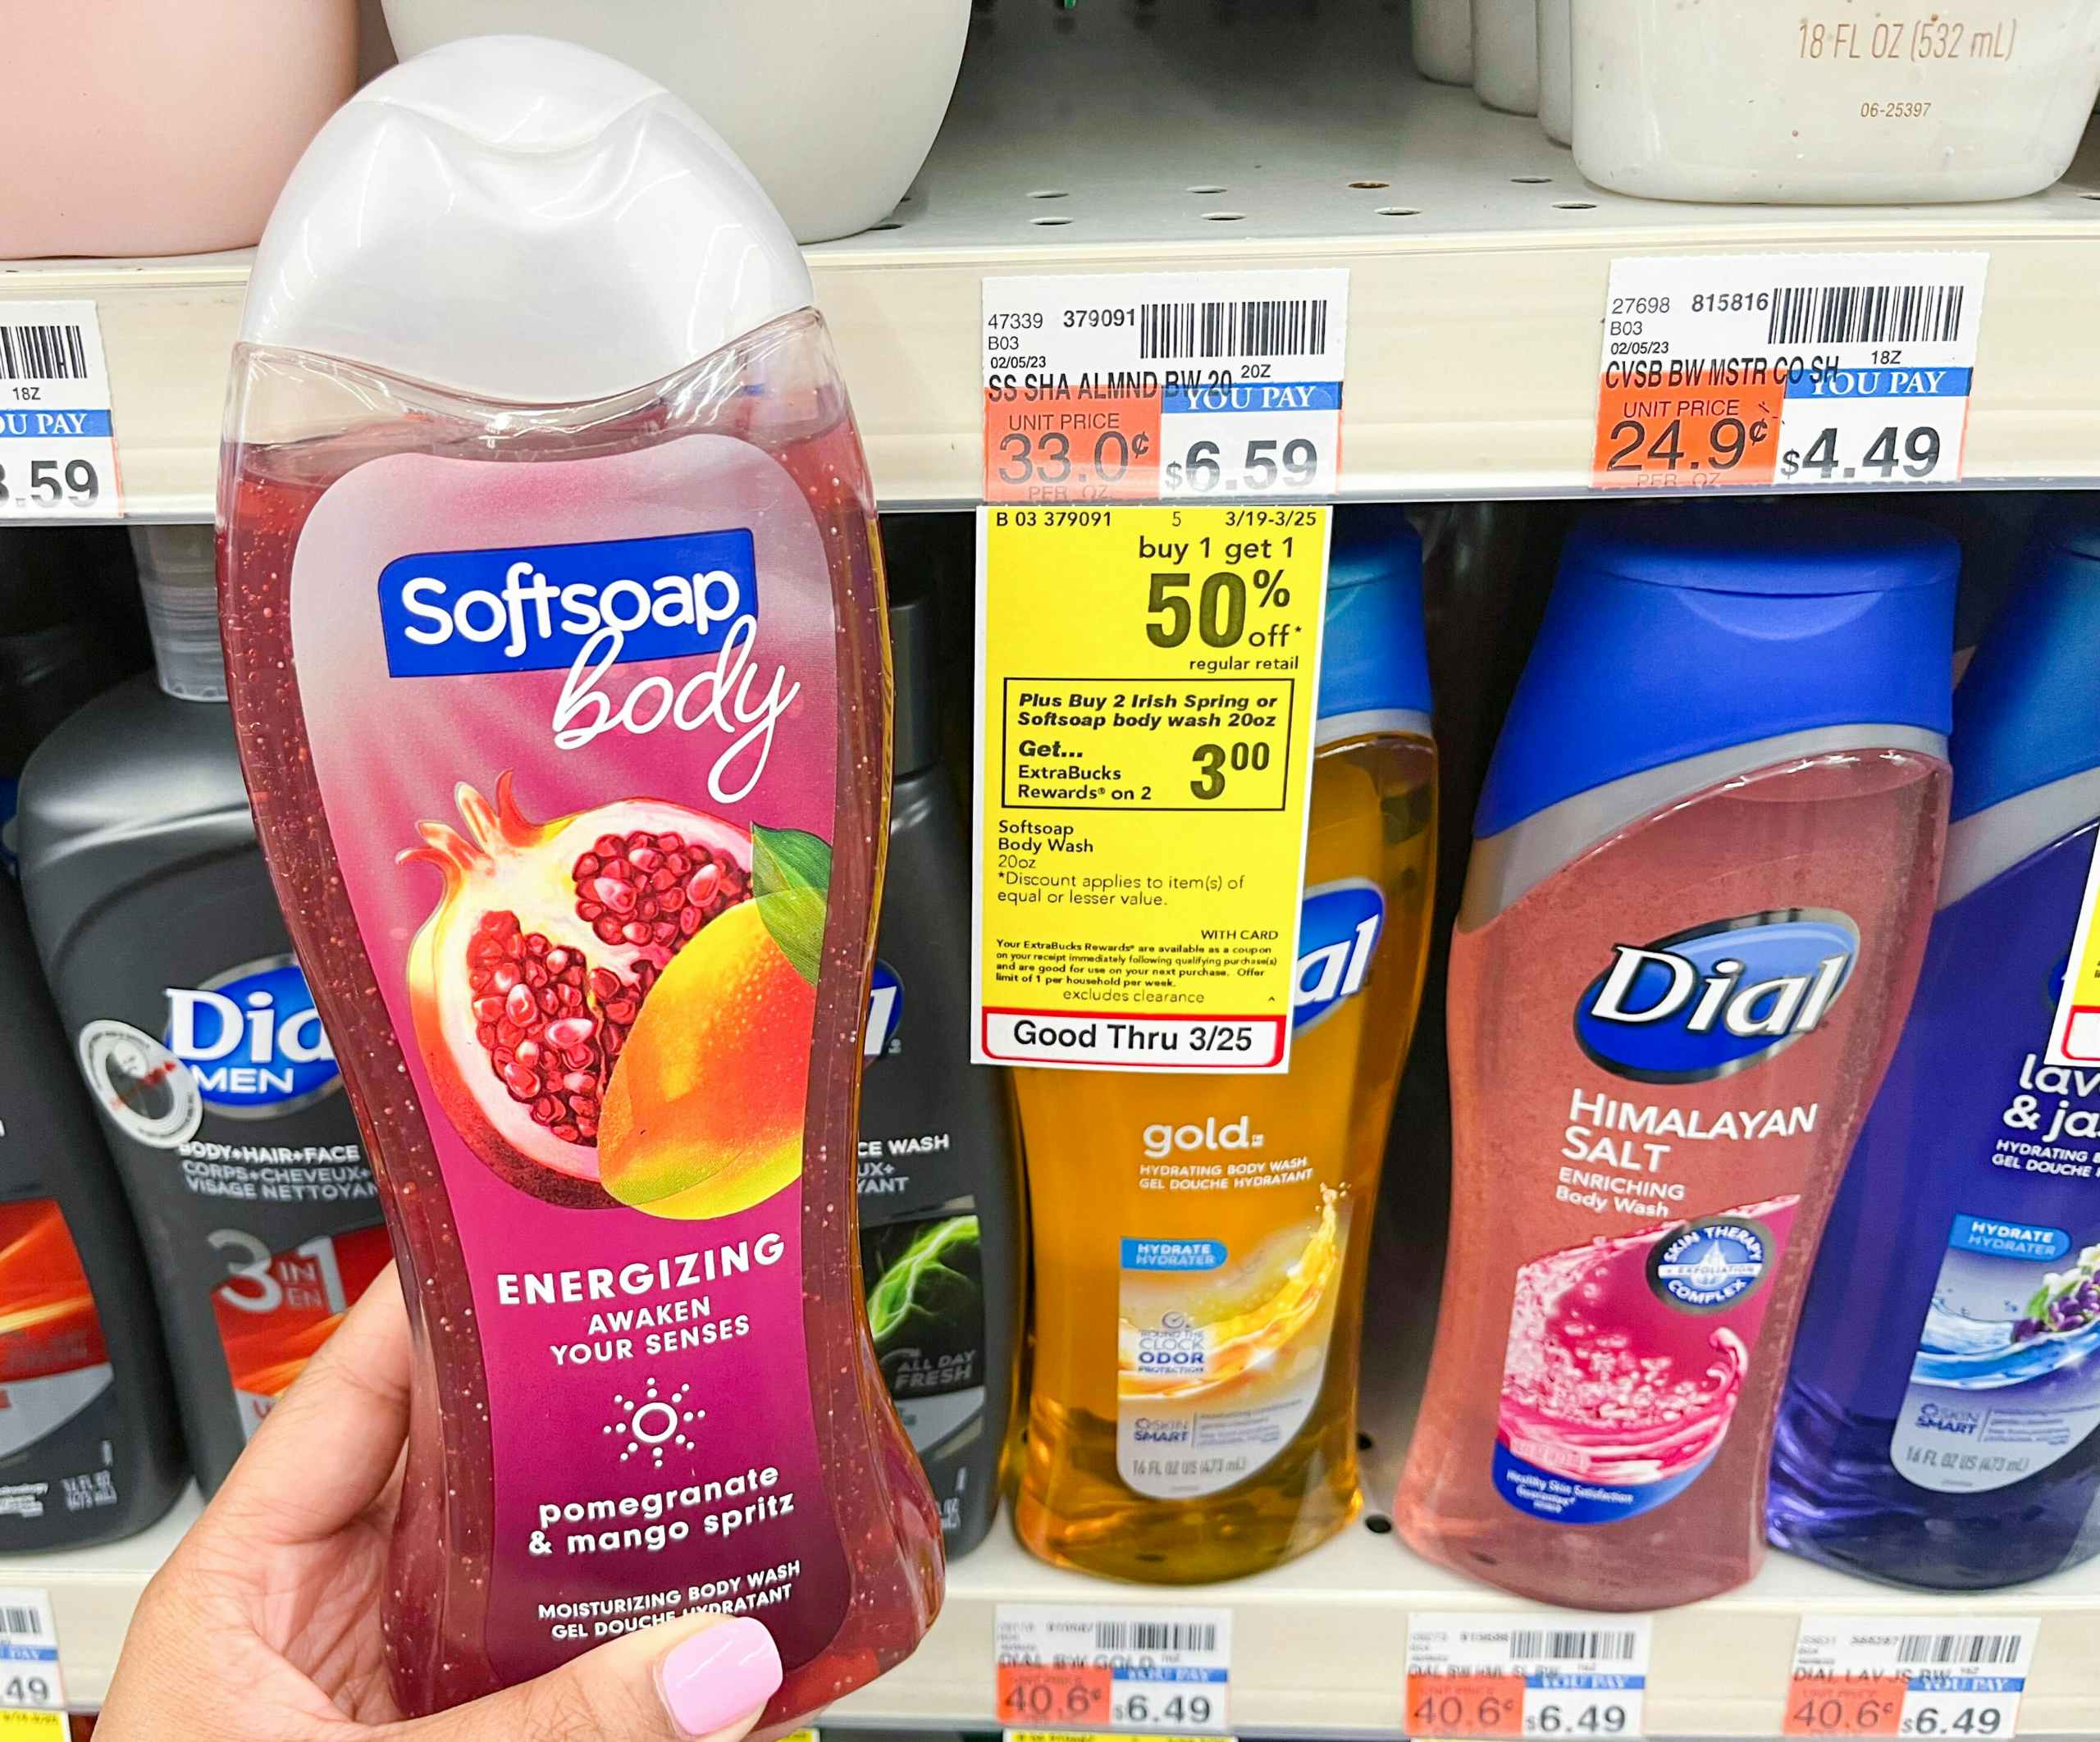 hand holding Softsoap body wash bottle next to sales tag